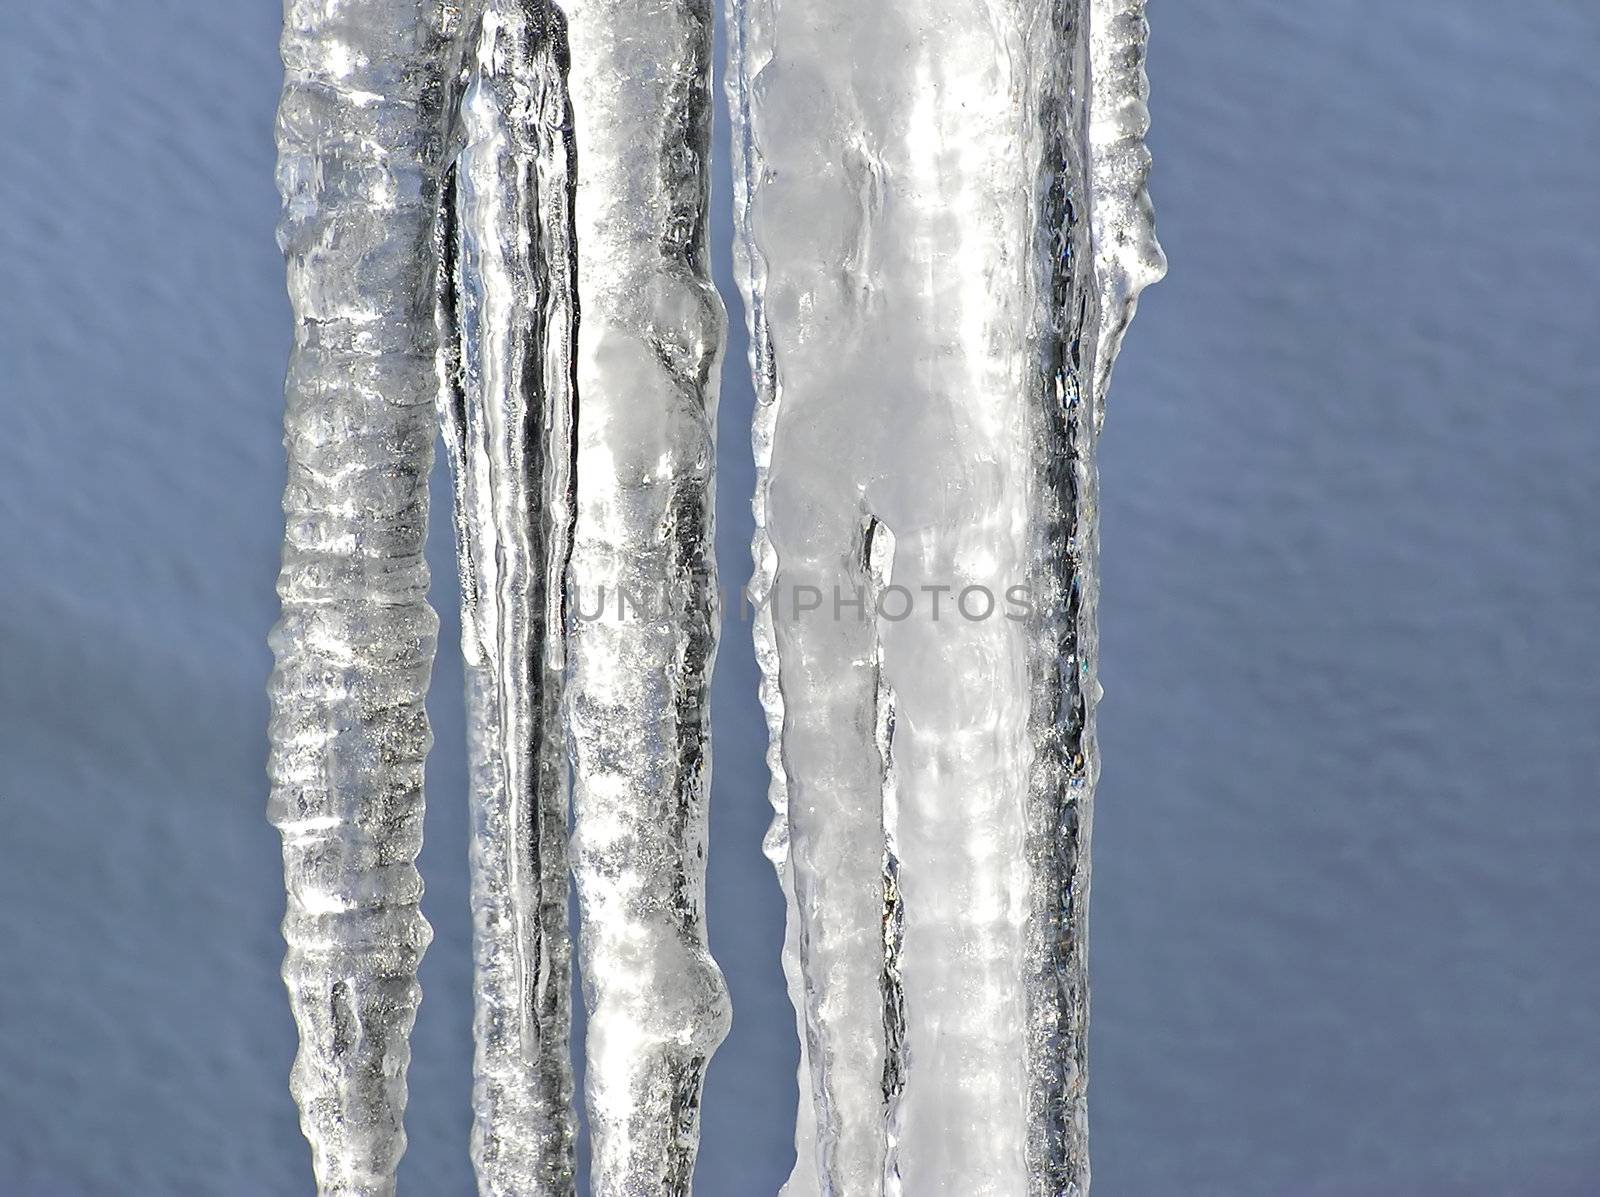 Melting icicles by Mirage3